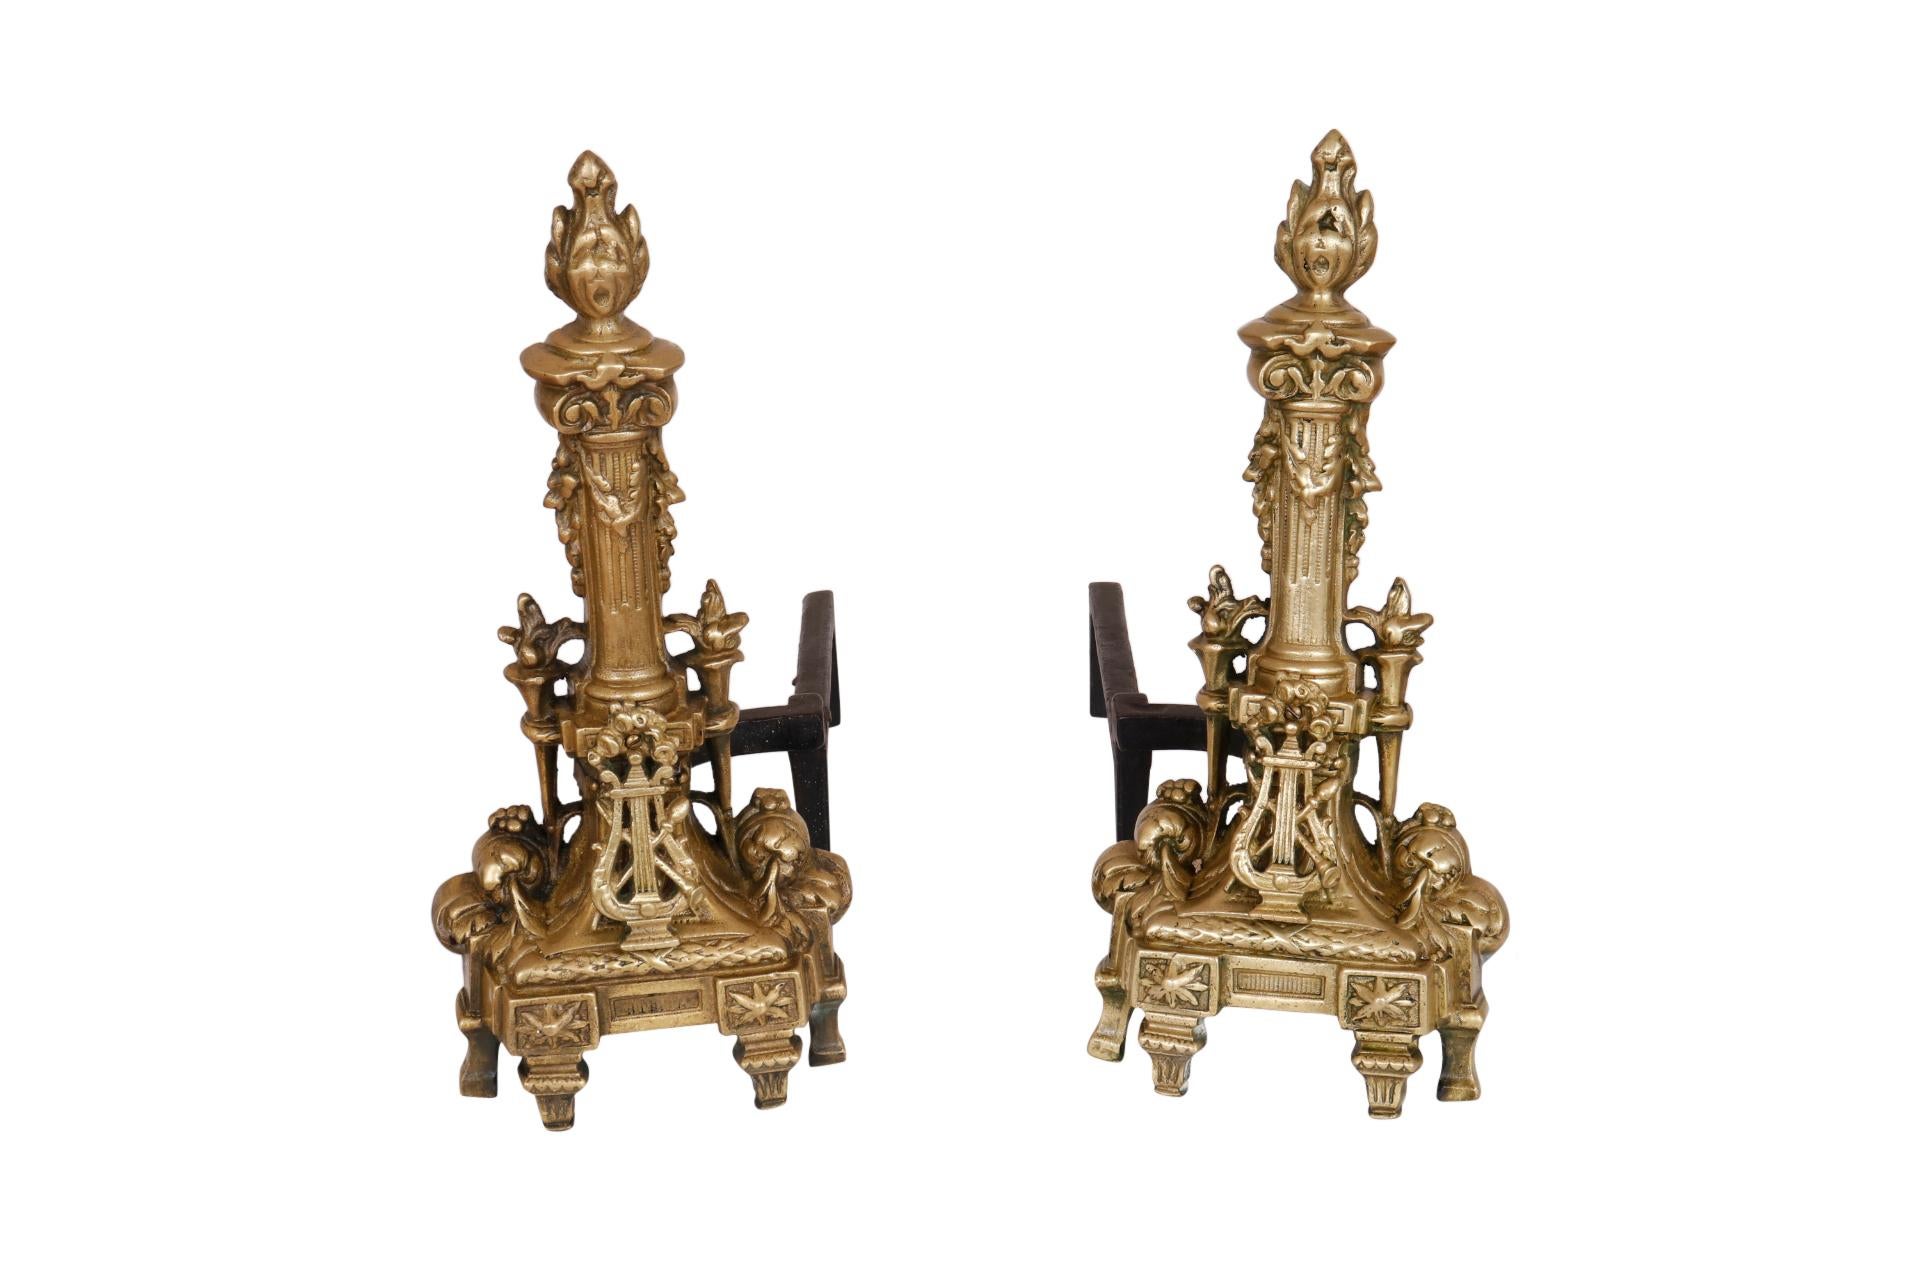 A pair of Regency style andirons by United Manufacturing. Brass and iron andirons are decorated with musical details. Central columns shaped like candles with acanthus swags are flanked with small torches. In front, a lyre is crossed with a clarinet